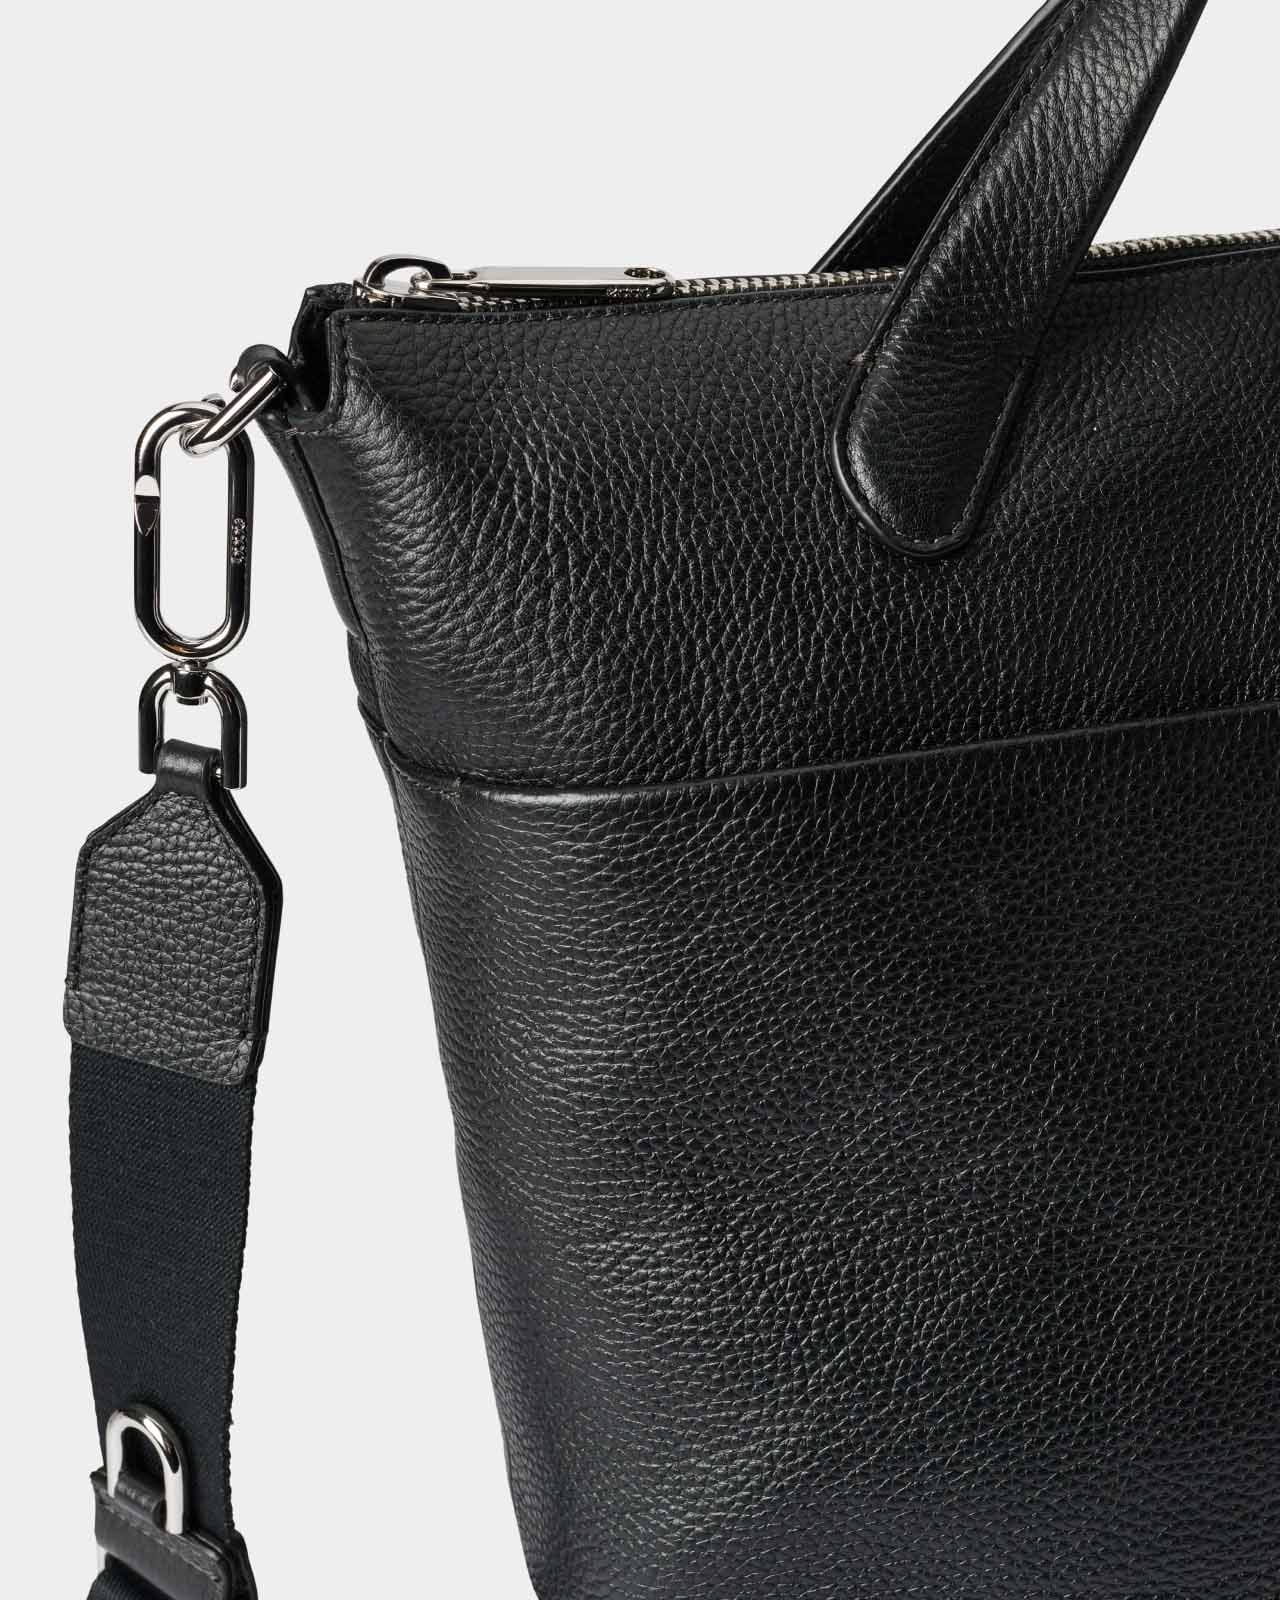 Strap details of leather tote